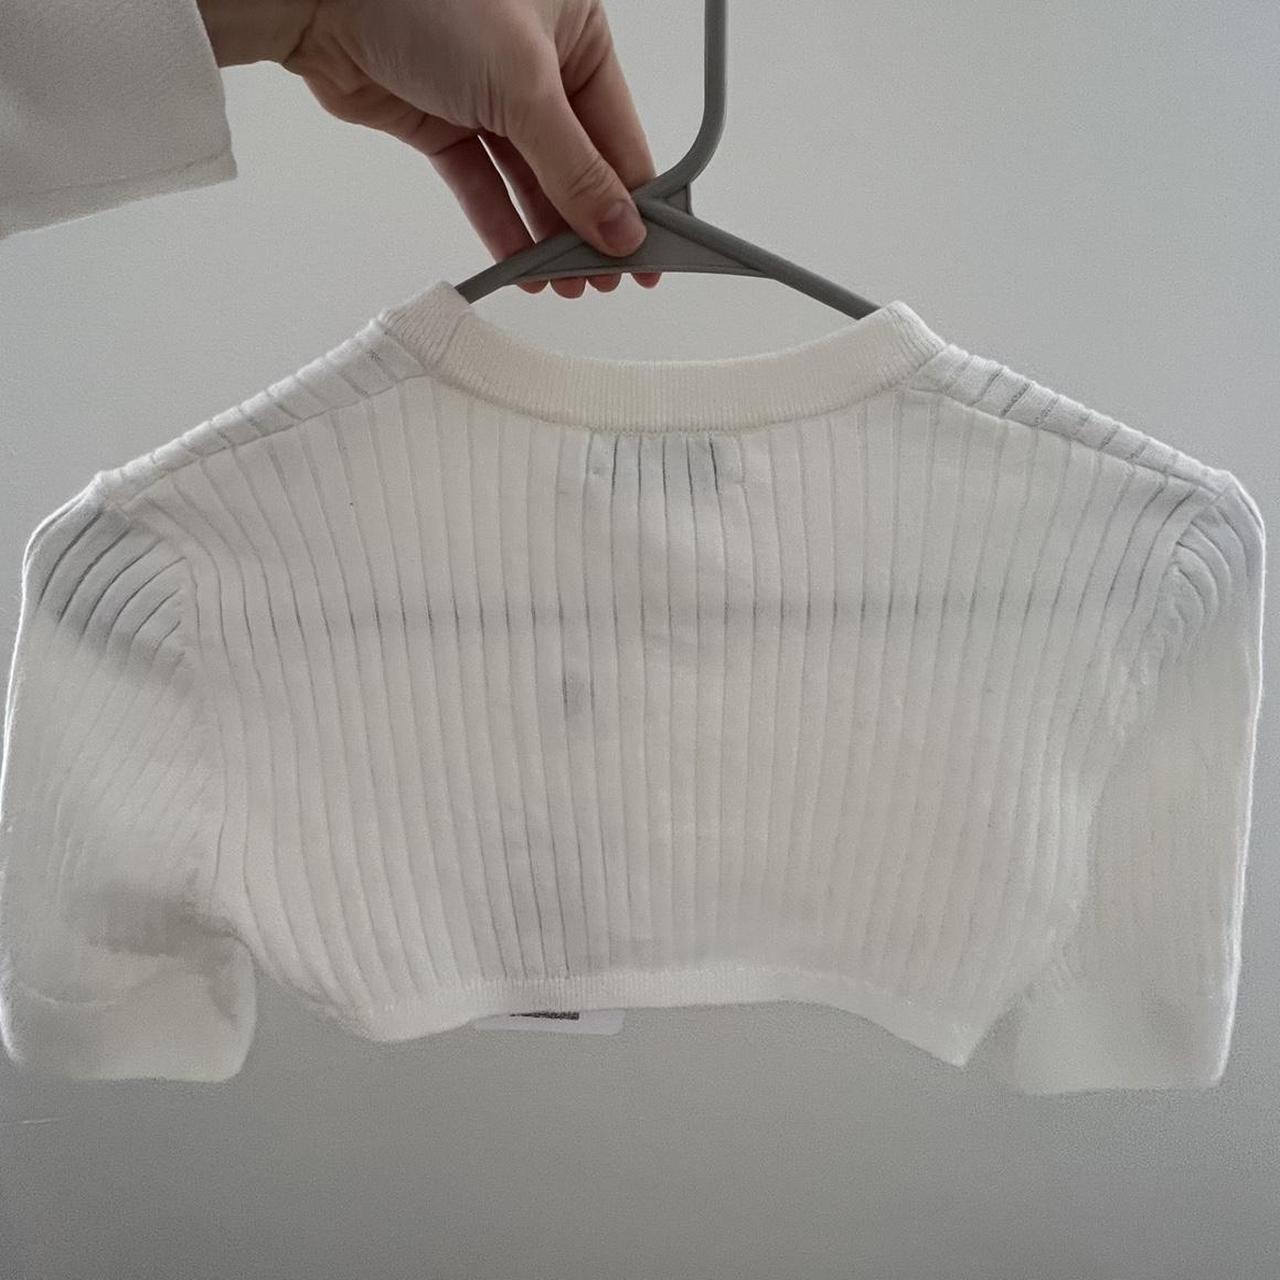 Product Image 4 - COURREGES cropped top sweater knit
VINTAGE